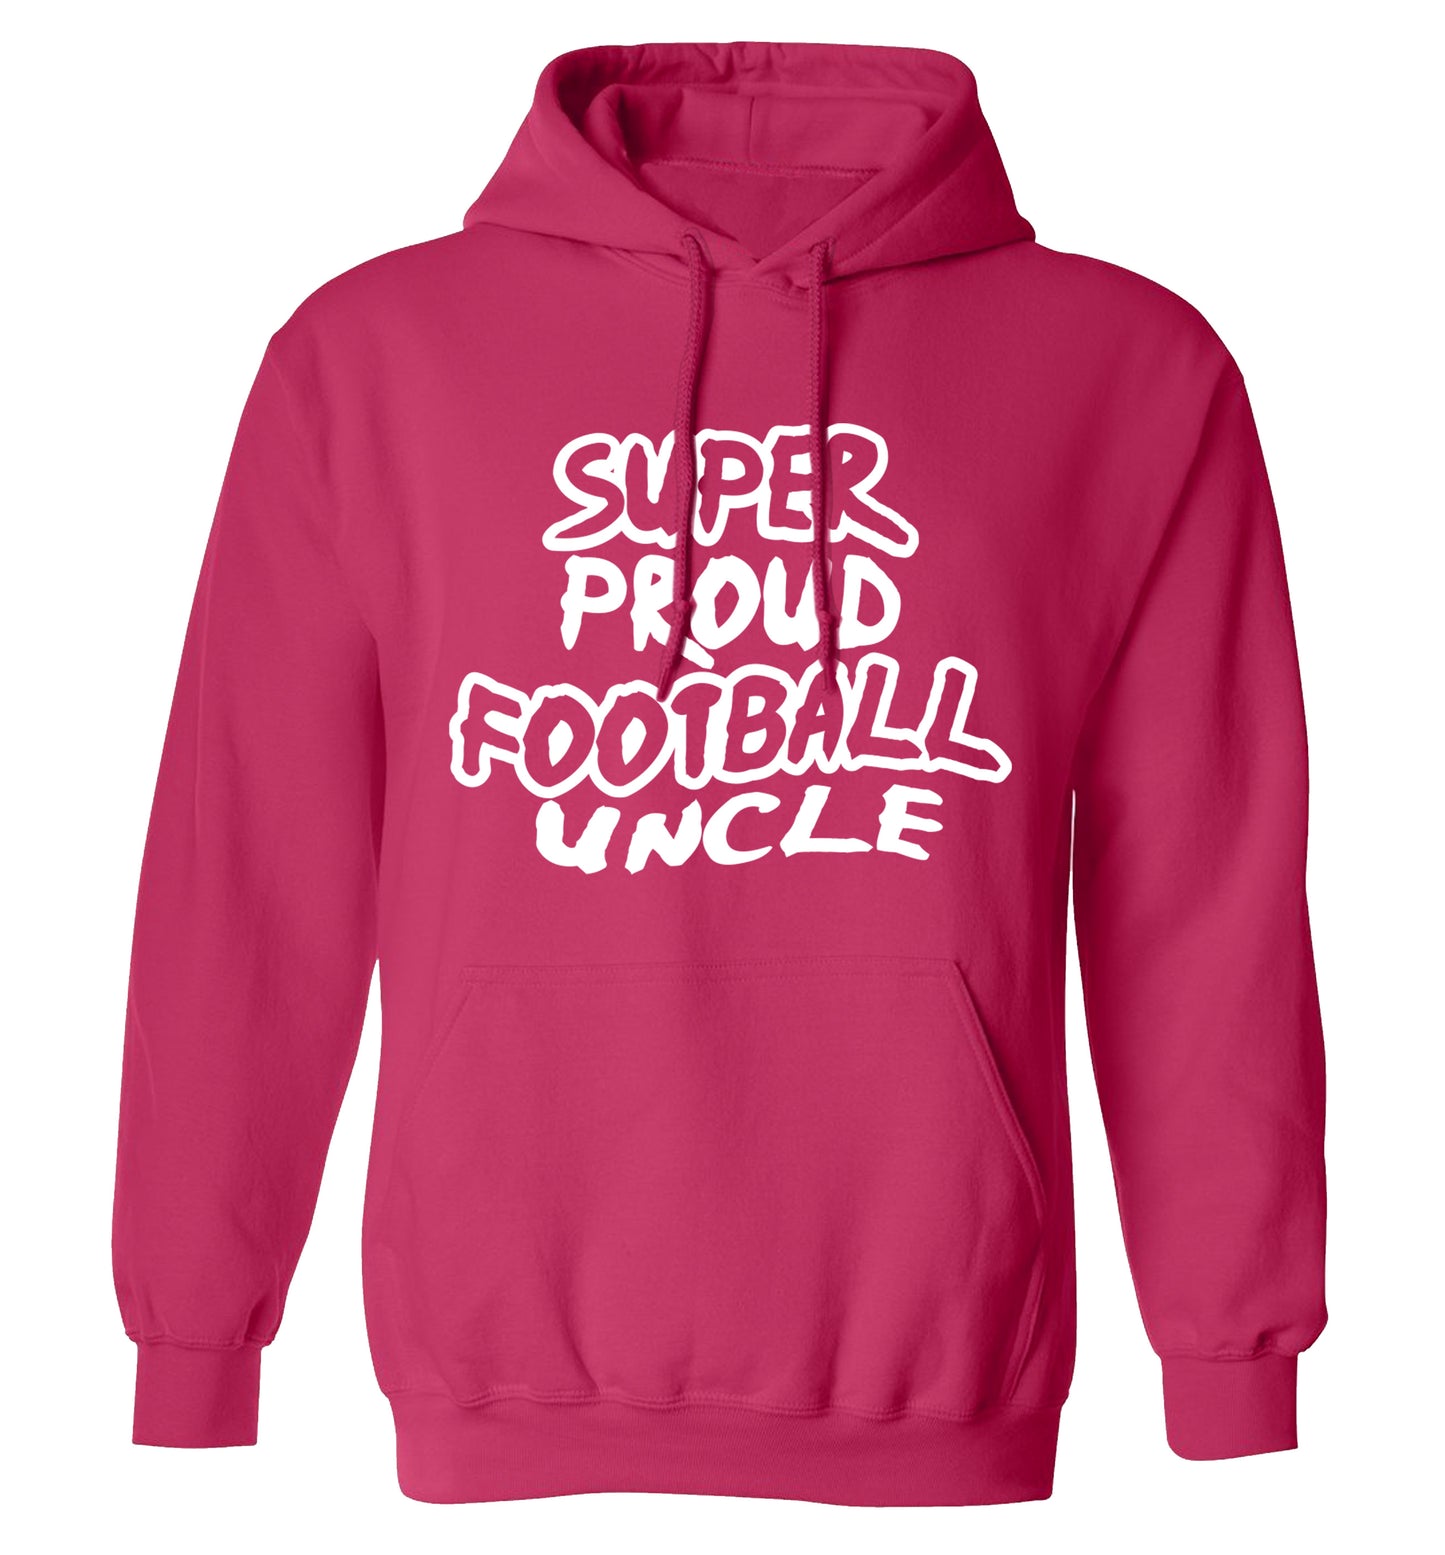 Super proud football uncle adults unisexpink hoodie 2XL